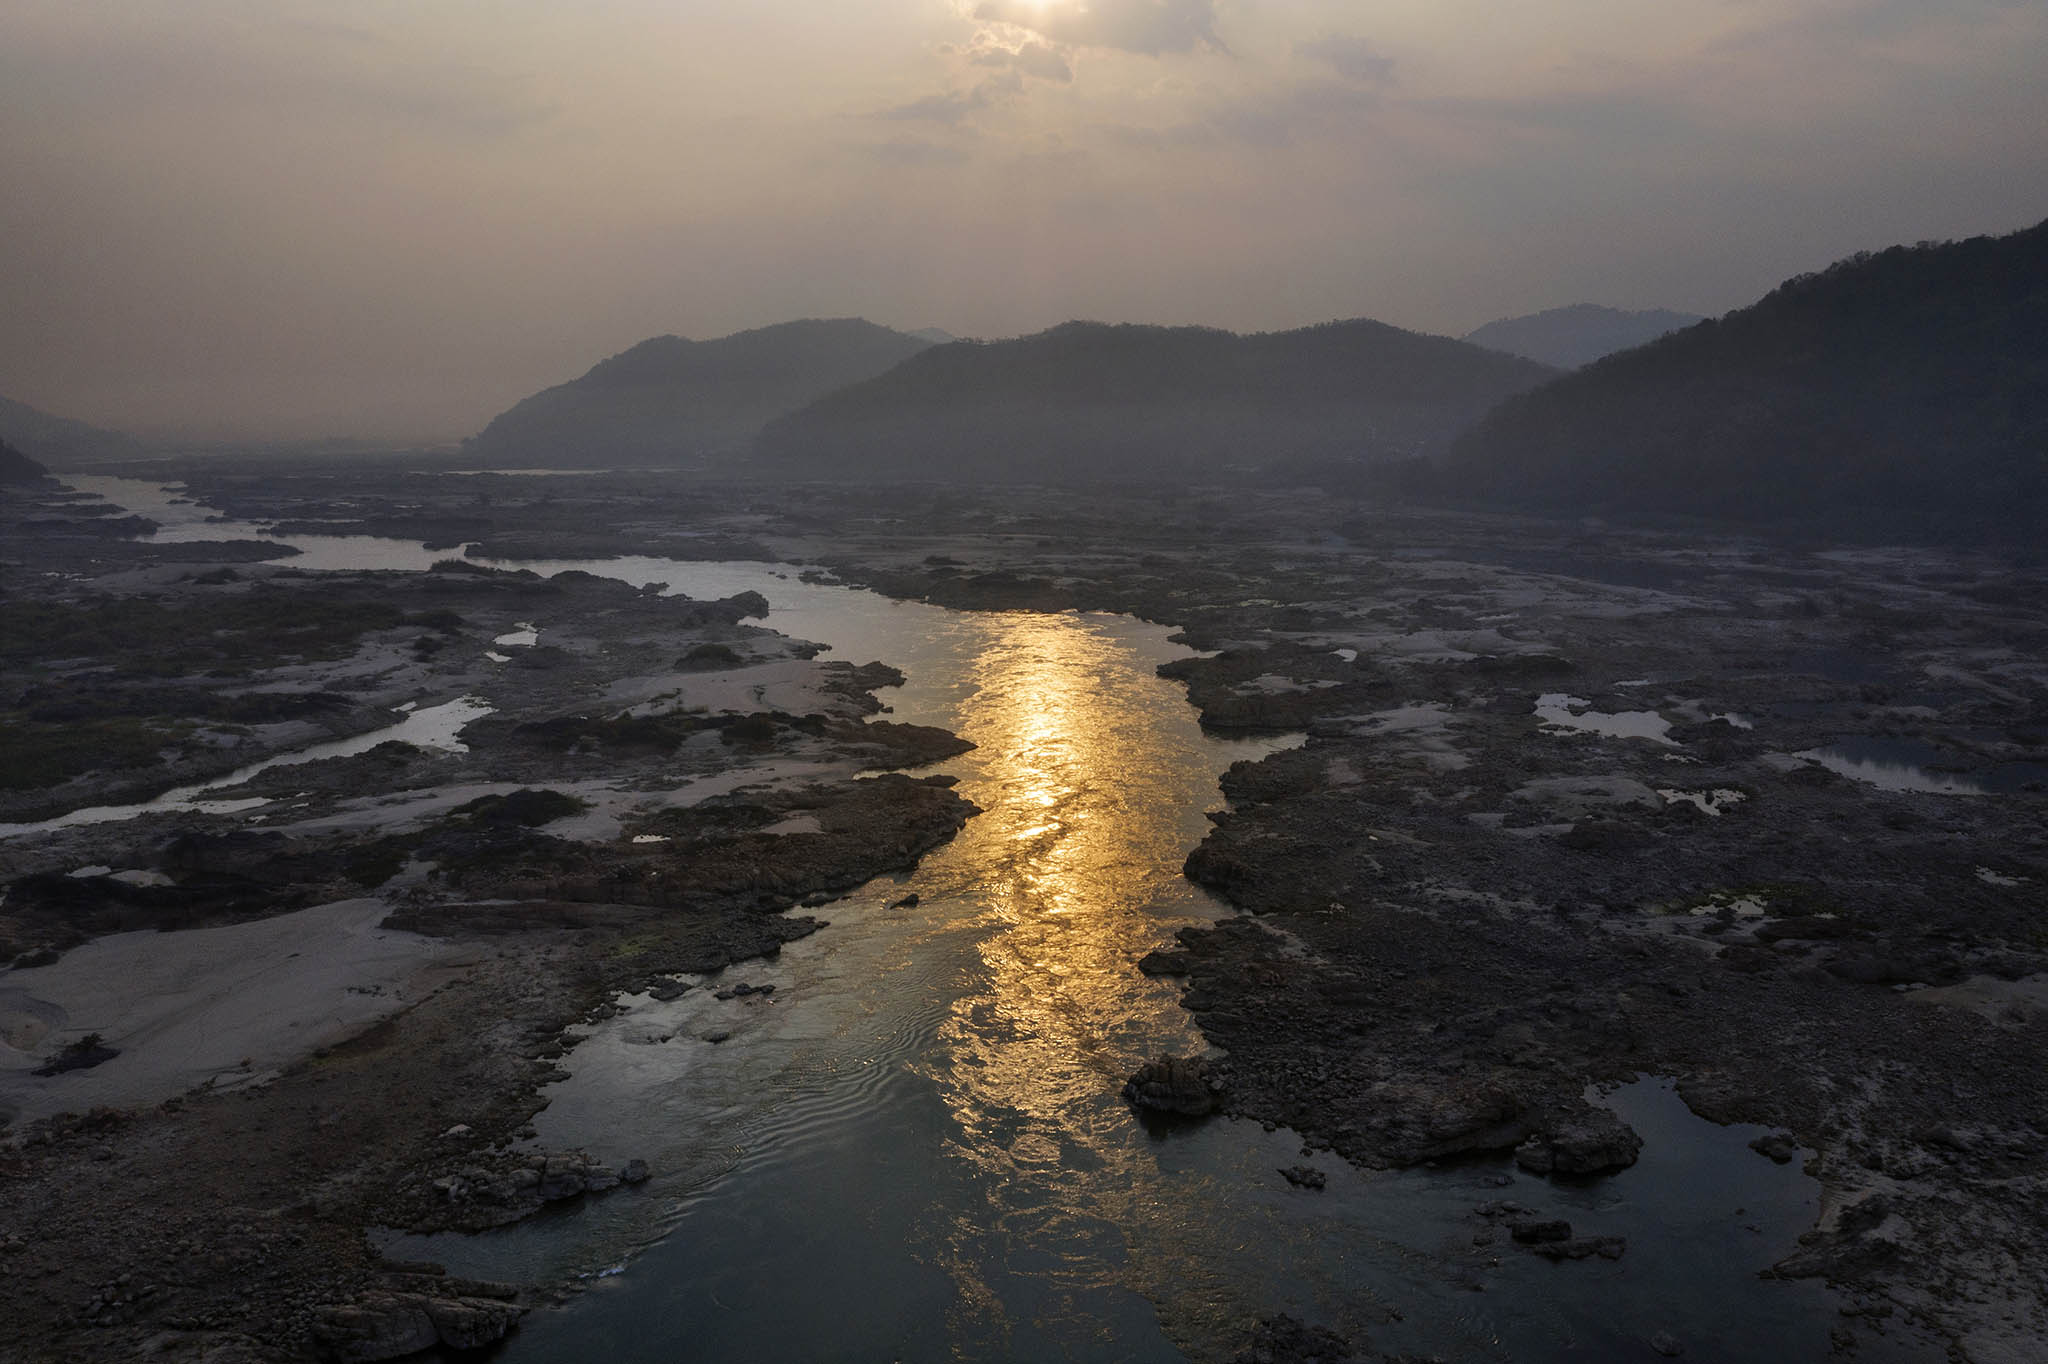 A narrowed Mekong River flows through the center of its partially dried out riverbed near Sangkhom, Thailand. January 25, 2020. (Adam Dean/The New York Times)